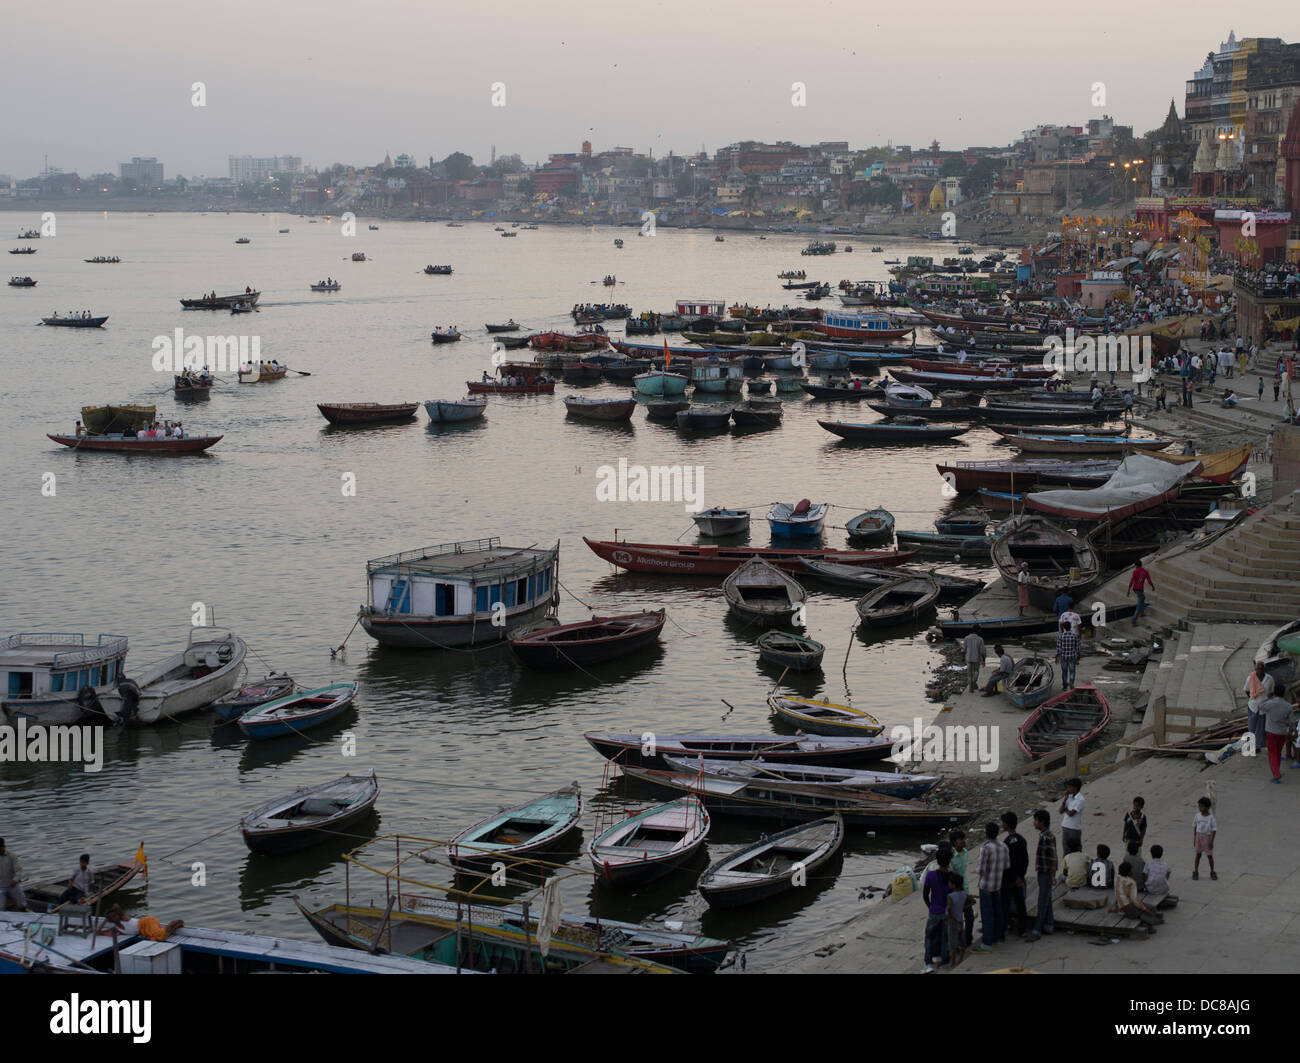 Life on the banks of the Ganges River - Varanasi, India Stock Photo